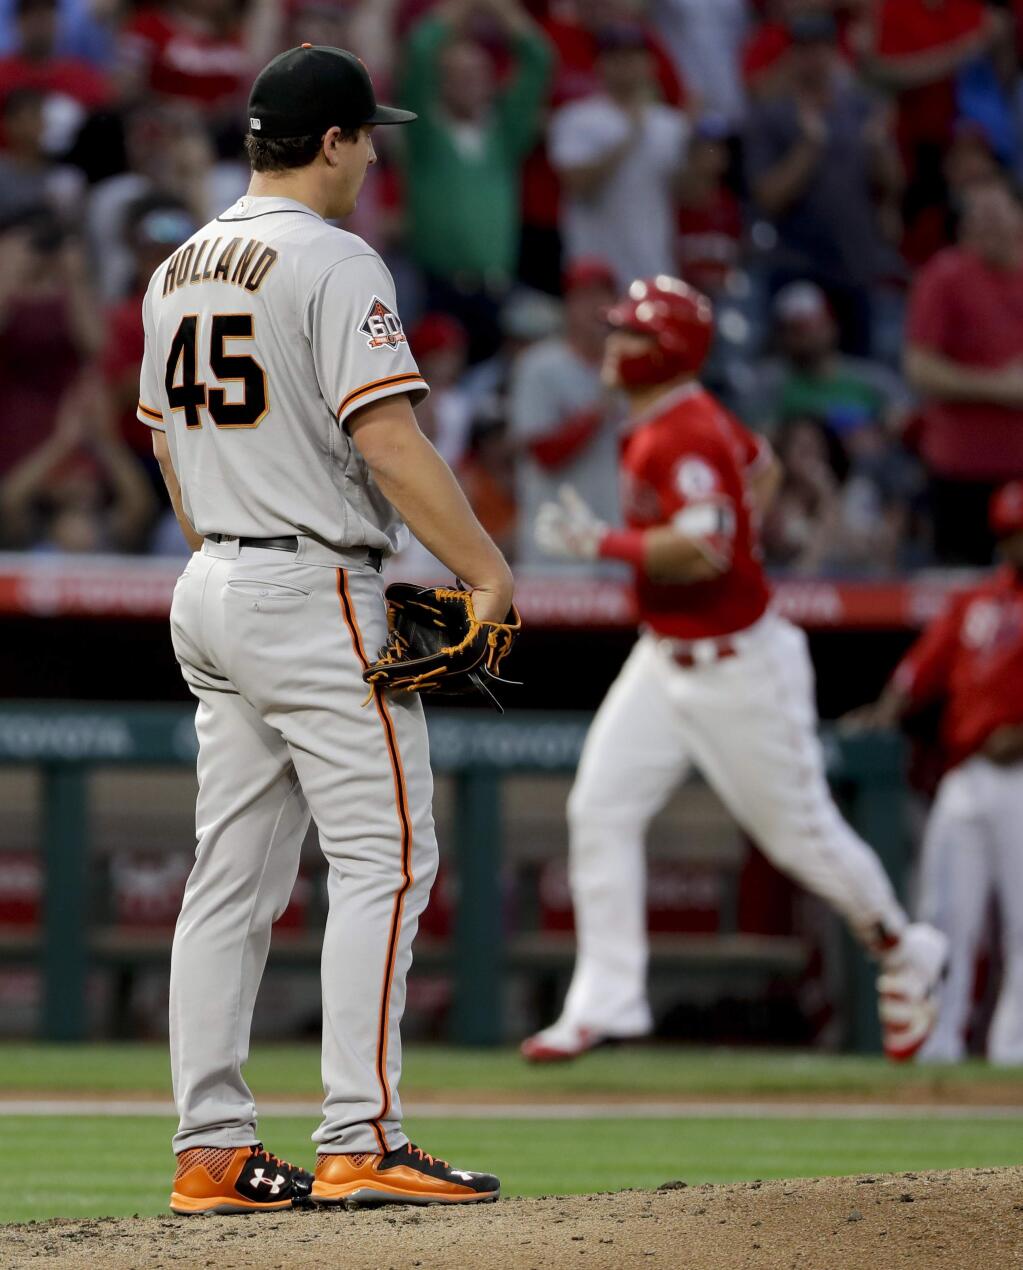 San Francisco Giants starting pitcher Derek Holland, left, watches as Los Angeles Angels' Mike Trout rounds the bases after a home run during the third inning in Anaheim, Saturday, April 21, 2018. (AP Photo/Chris Carlson)